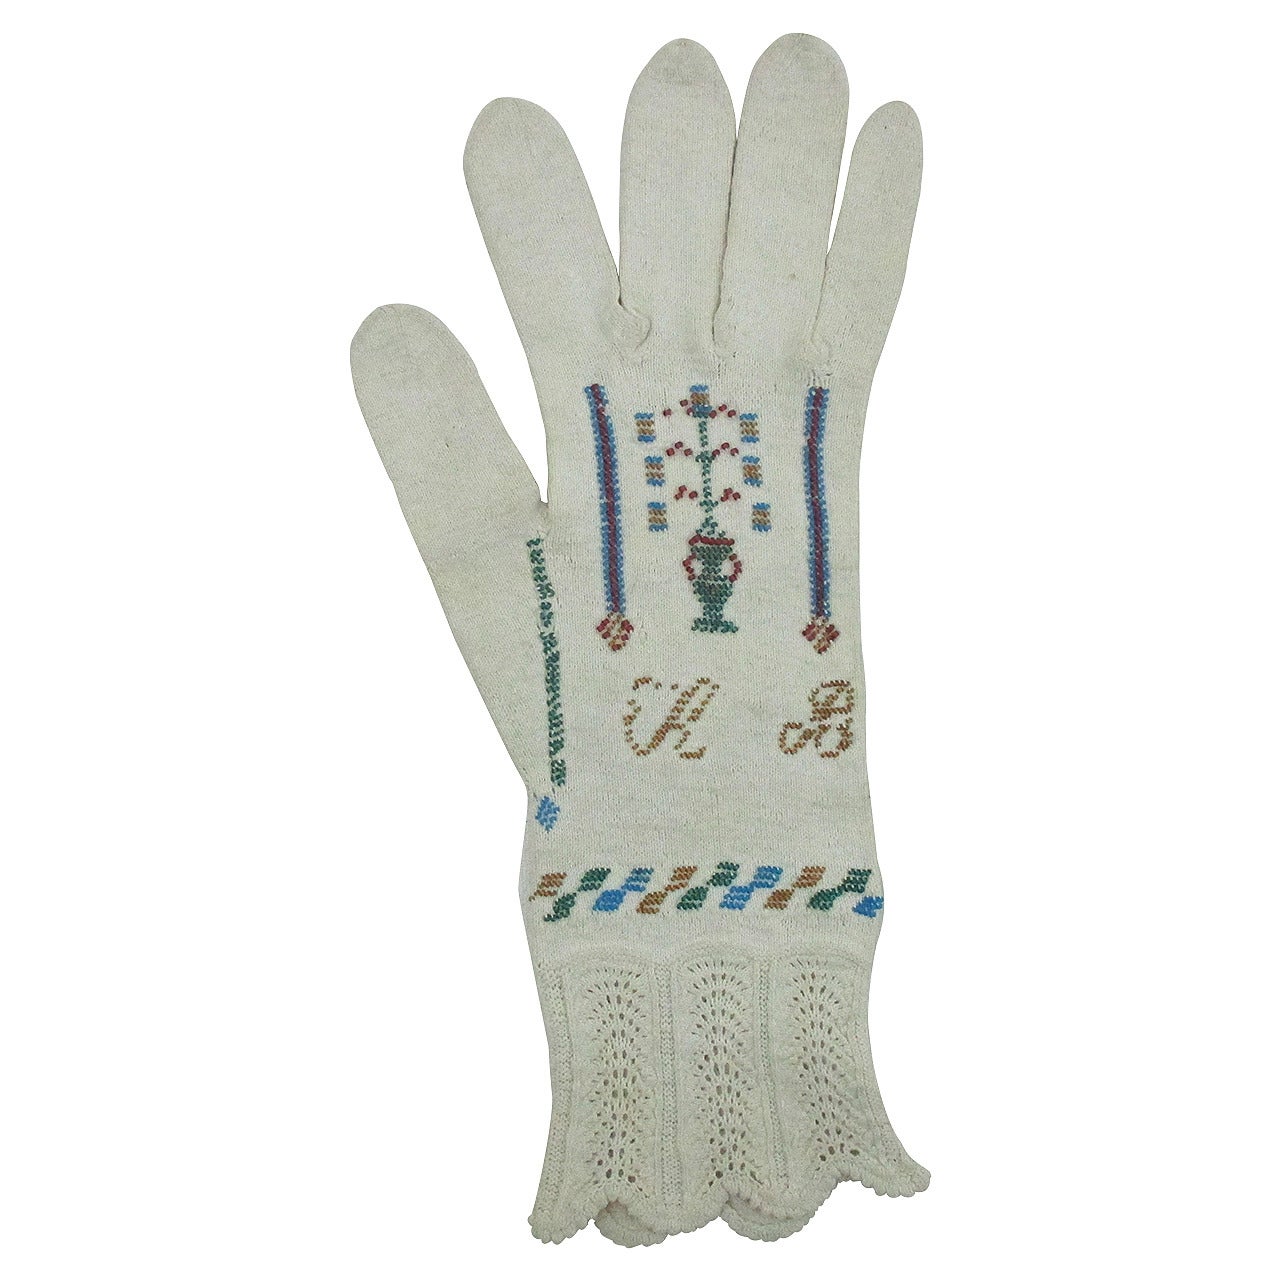 Unusual Knitted and Beaded Woman's Glove For Sale